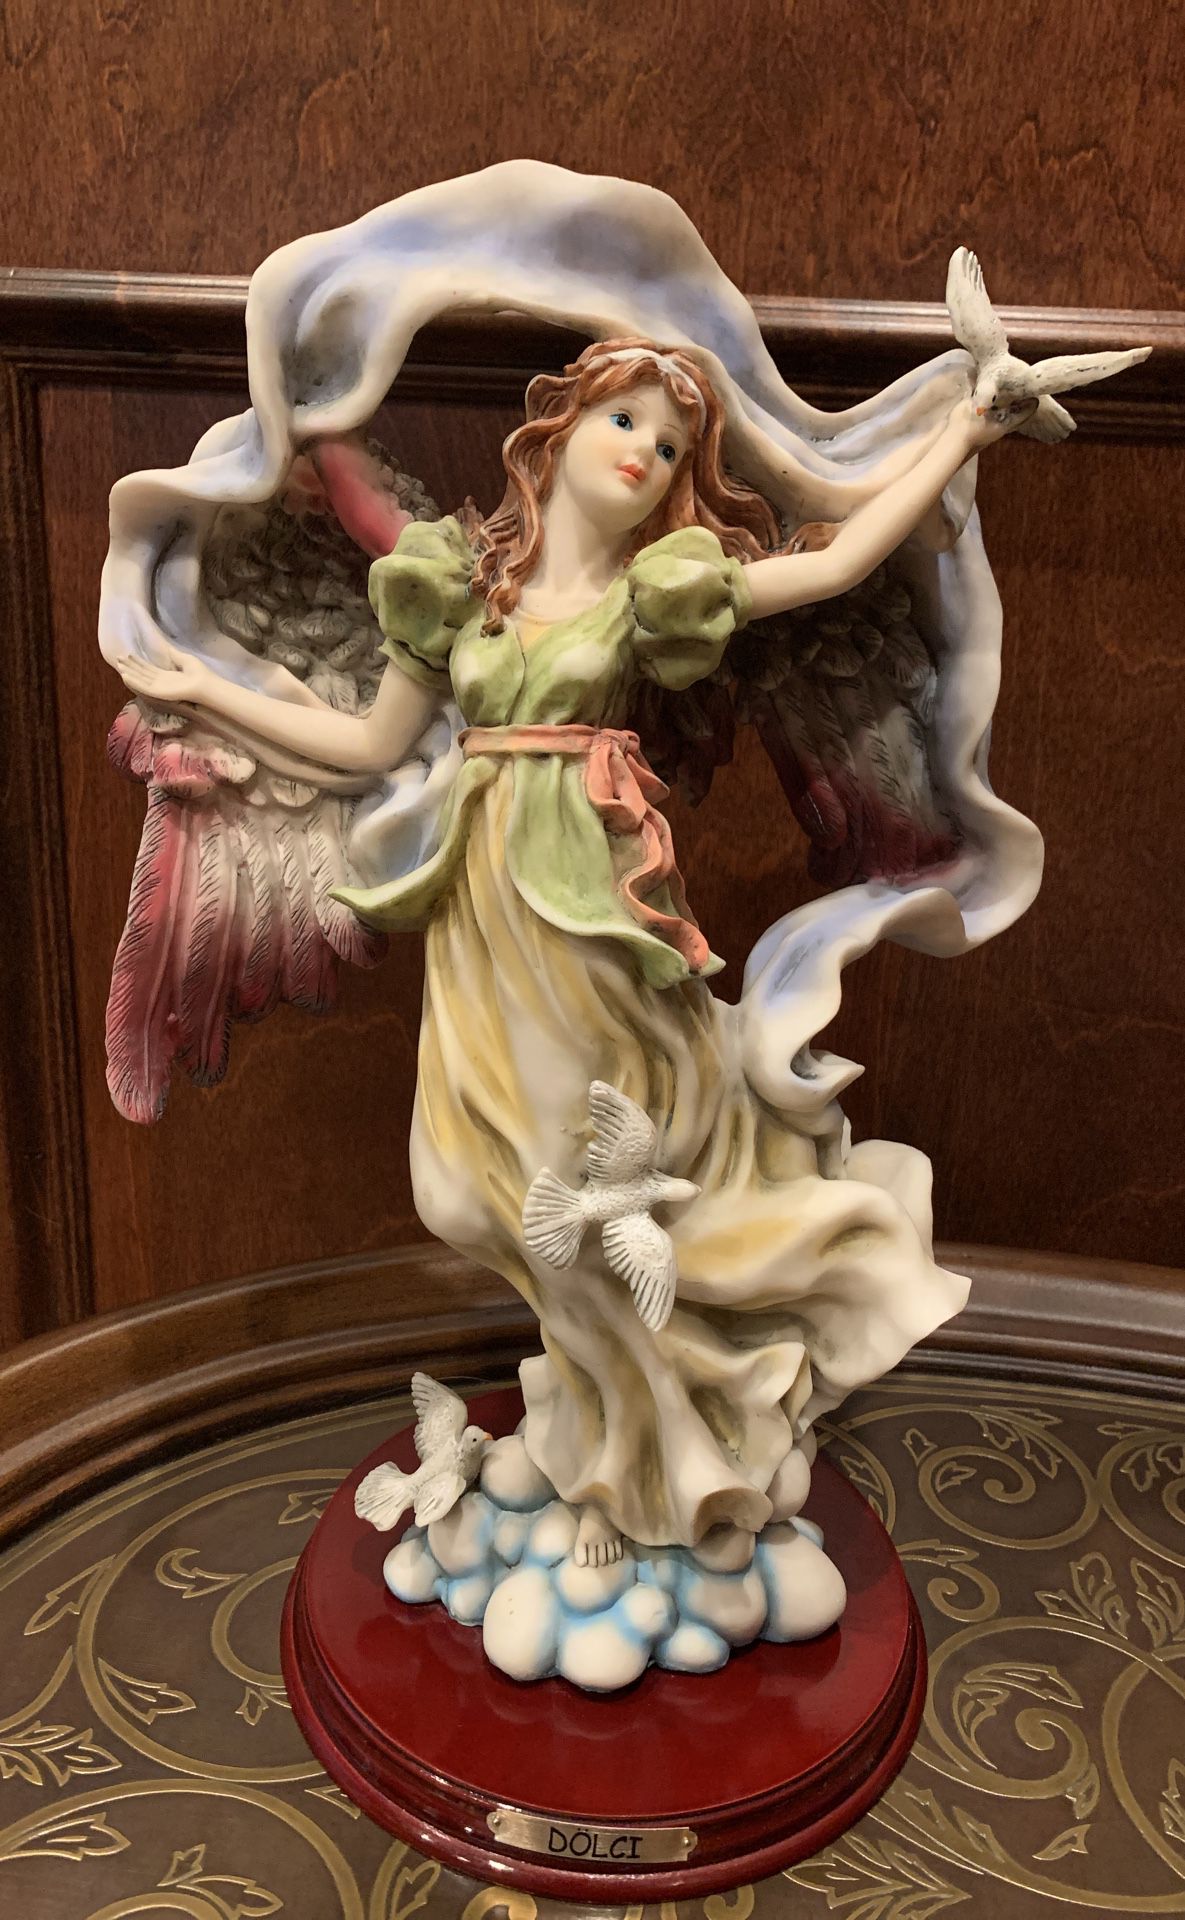 Collectible! Dolci Angel Figurine / Sculpture / Statue in Flowing Gown on a Cloud w/ Wings and Doves - Sage, Burgundy, Rose, Pink, Blue, & Gold